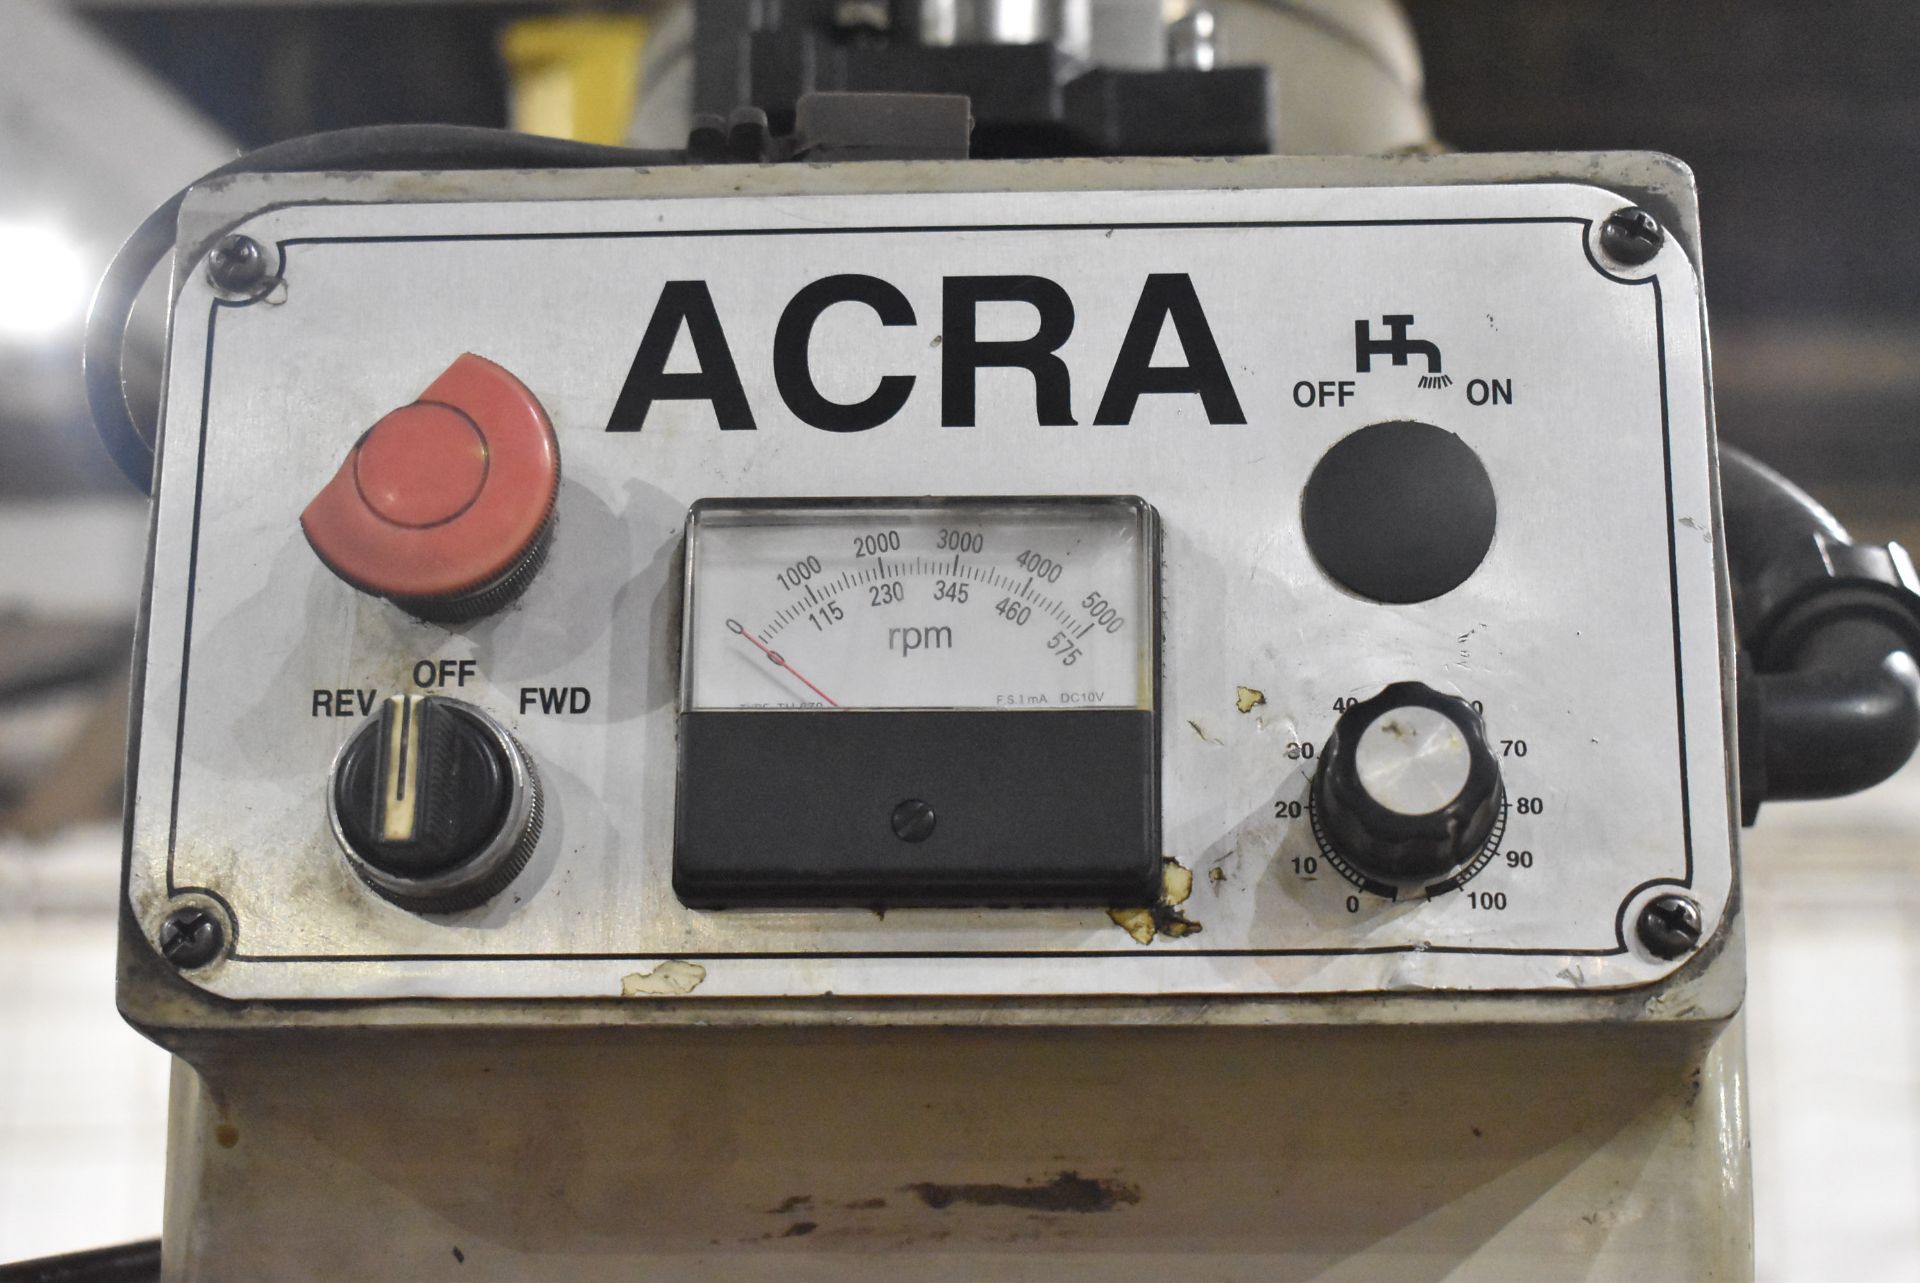 ACRA AM-25 VERTICAL MILLING MACHINE WITH 9"X42" TABLE, SPEEDS TO 5000 RPM, POWER TABLE, 2 HP, S/N: - Image 5 of 7